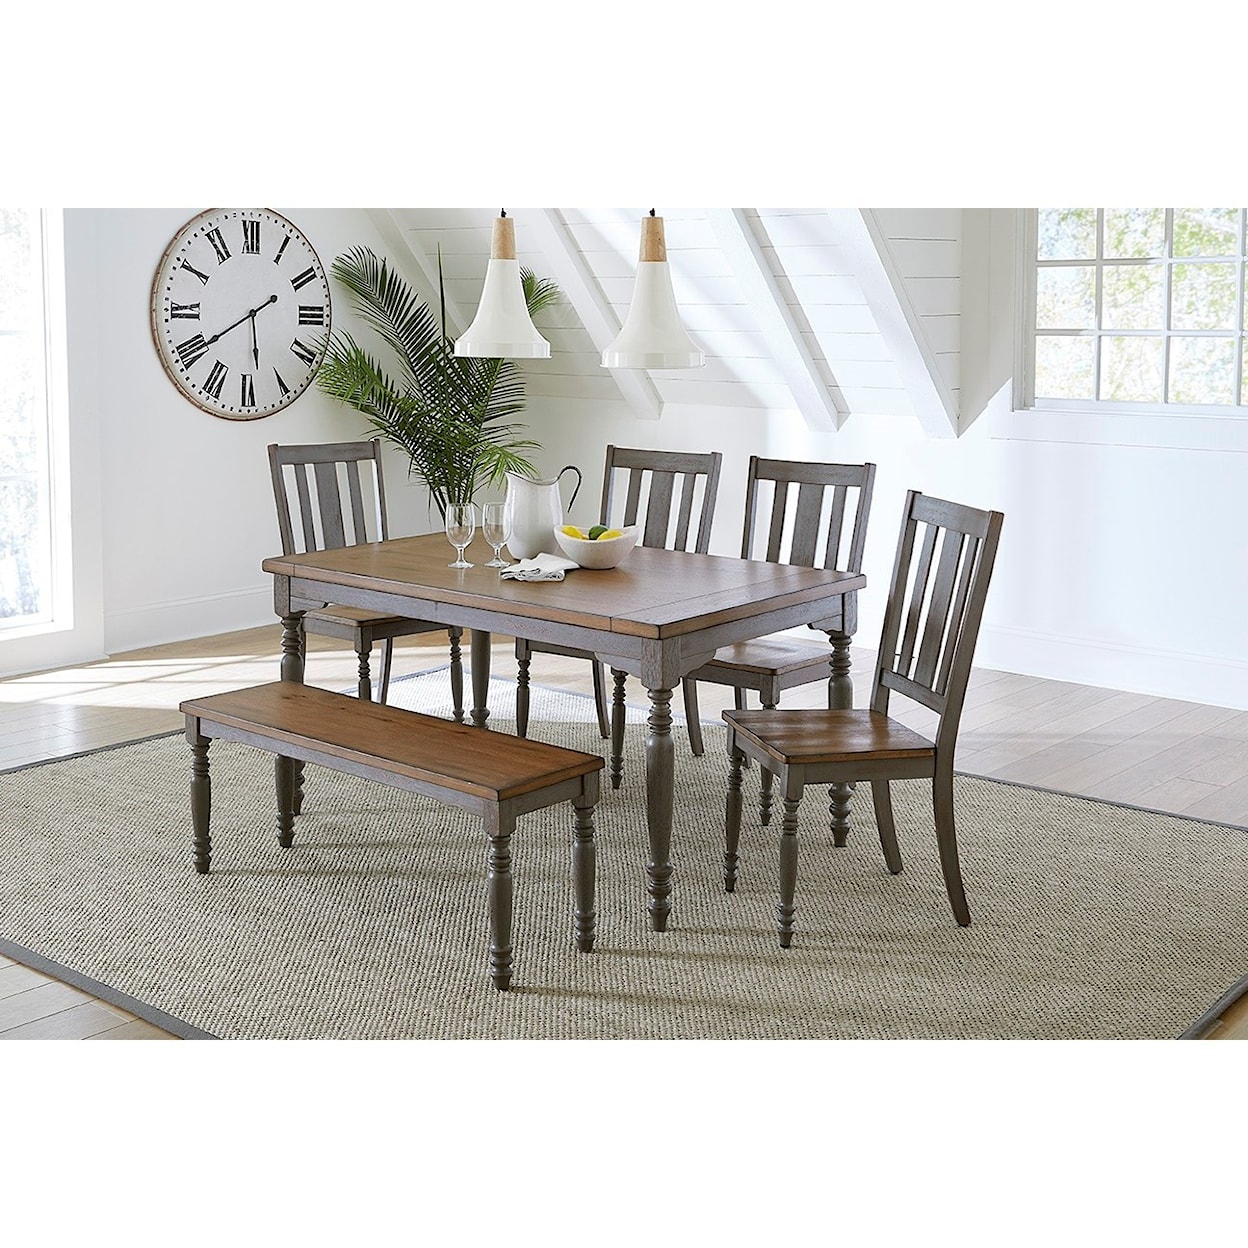 Progressive Furniture Midori Table and Chair Set with Bench